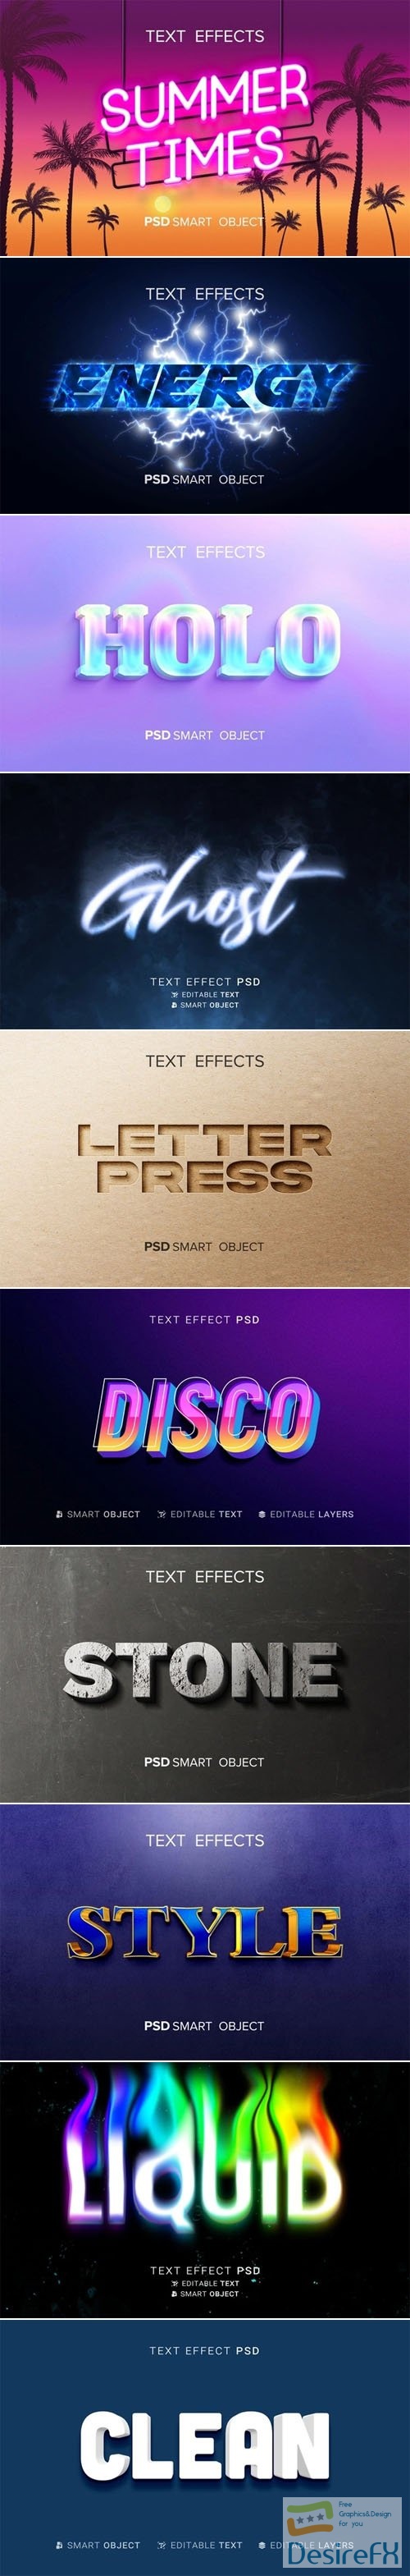 10 Creative Photoshop Text Effects Vol.2